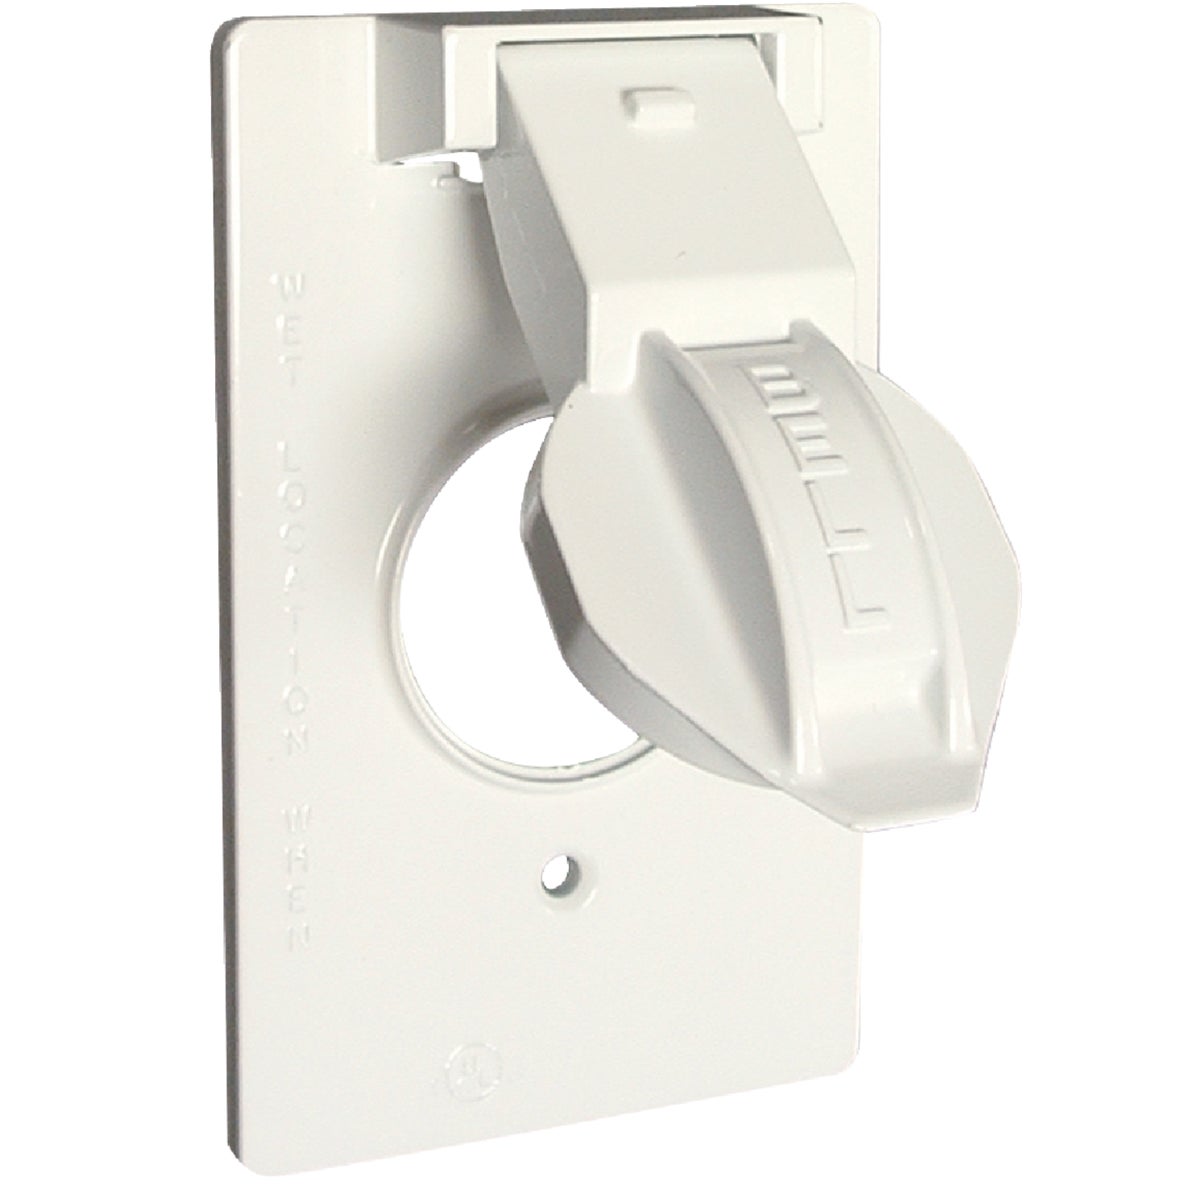 Item 520969, Device-mounted vertical cover for single receptacle, 1.406-inch diameter.